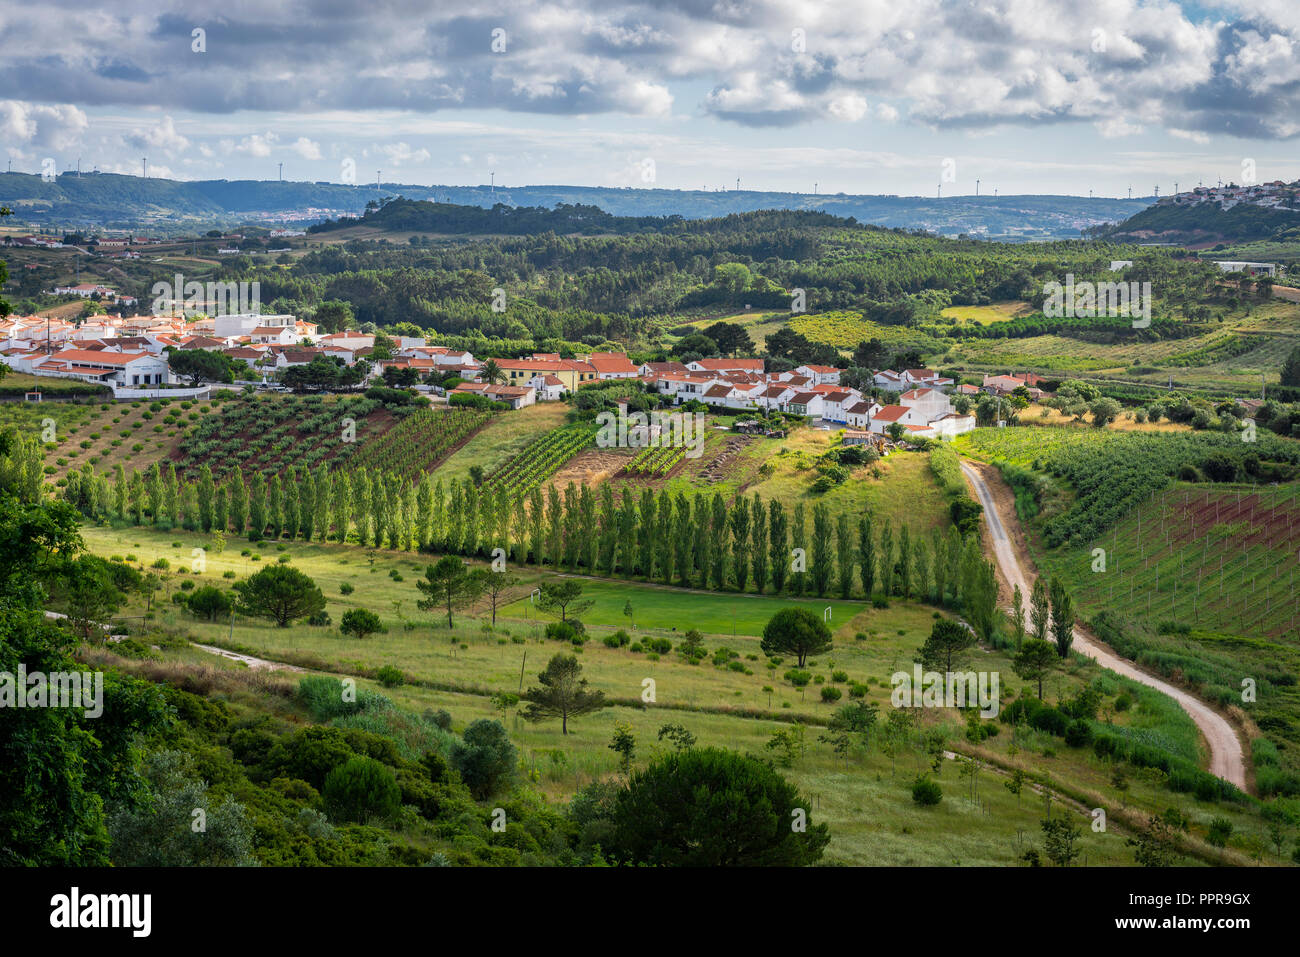 View of Portuguese town in hilly landscape of Oeste with lush green countryside Stock Photo